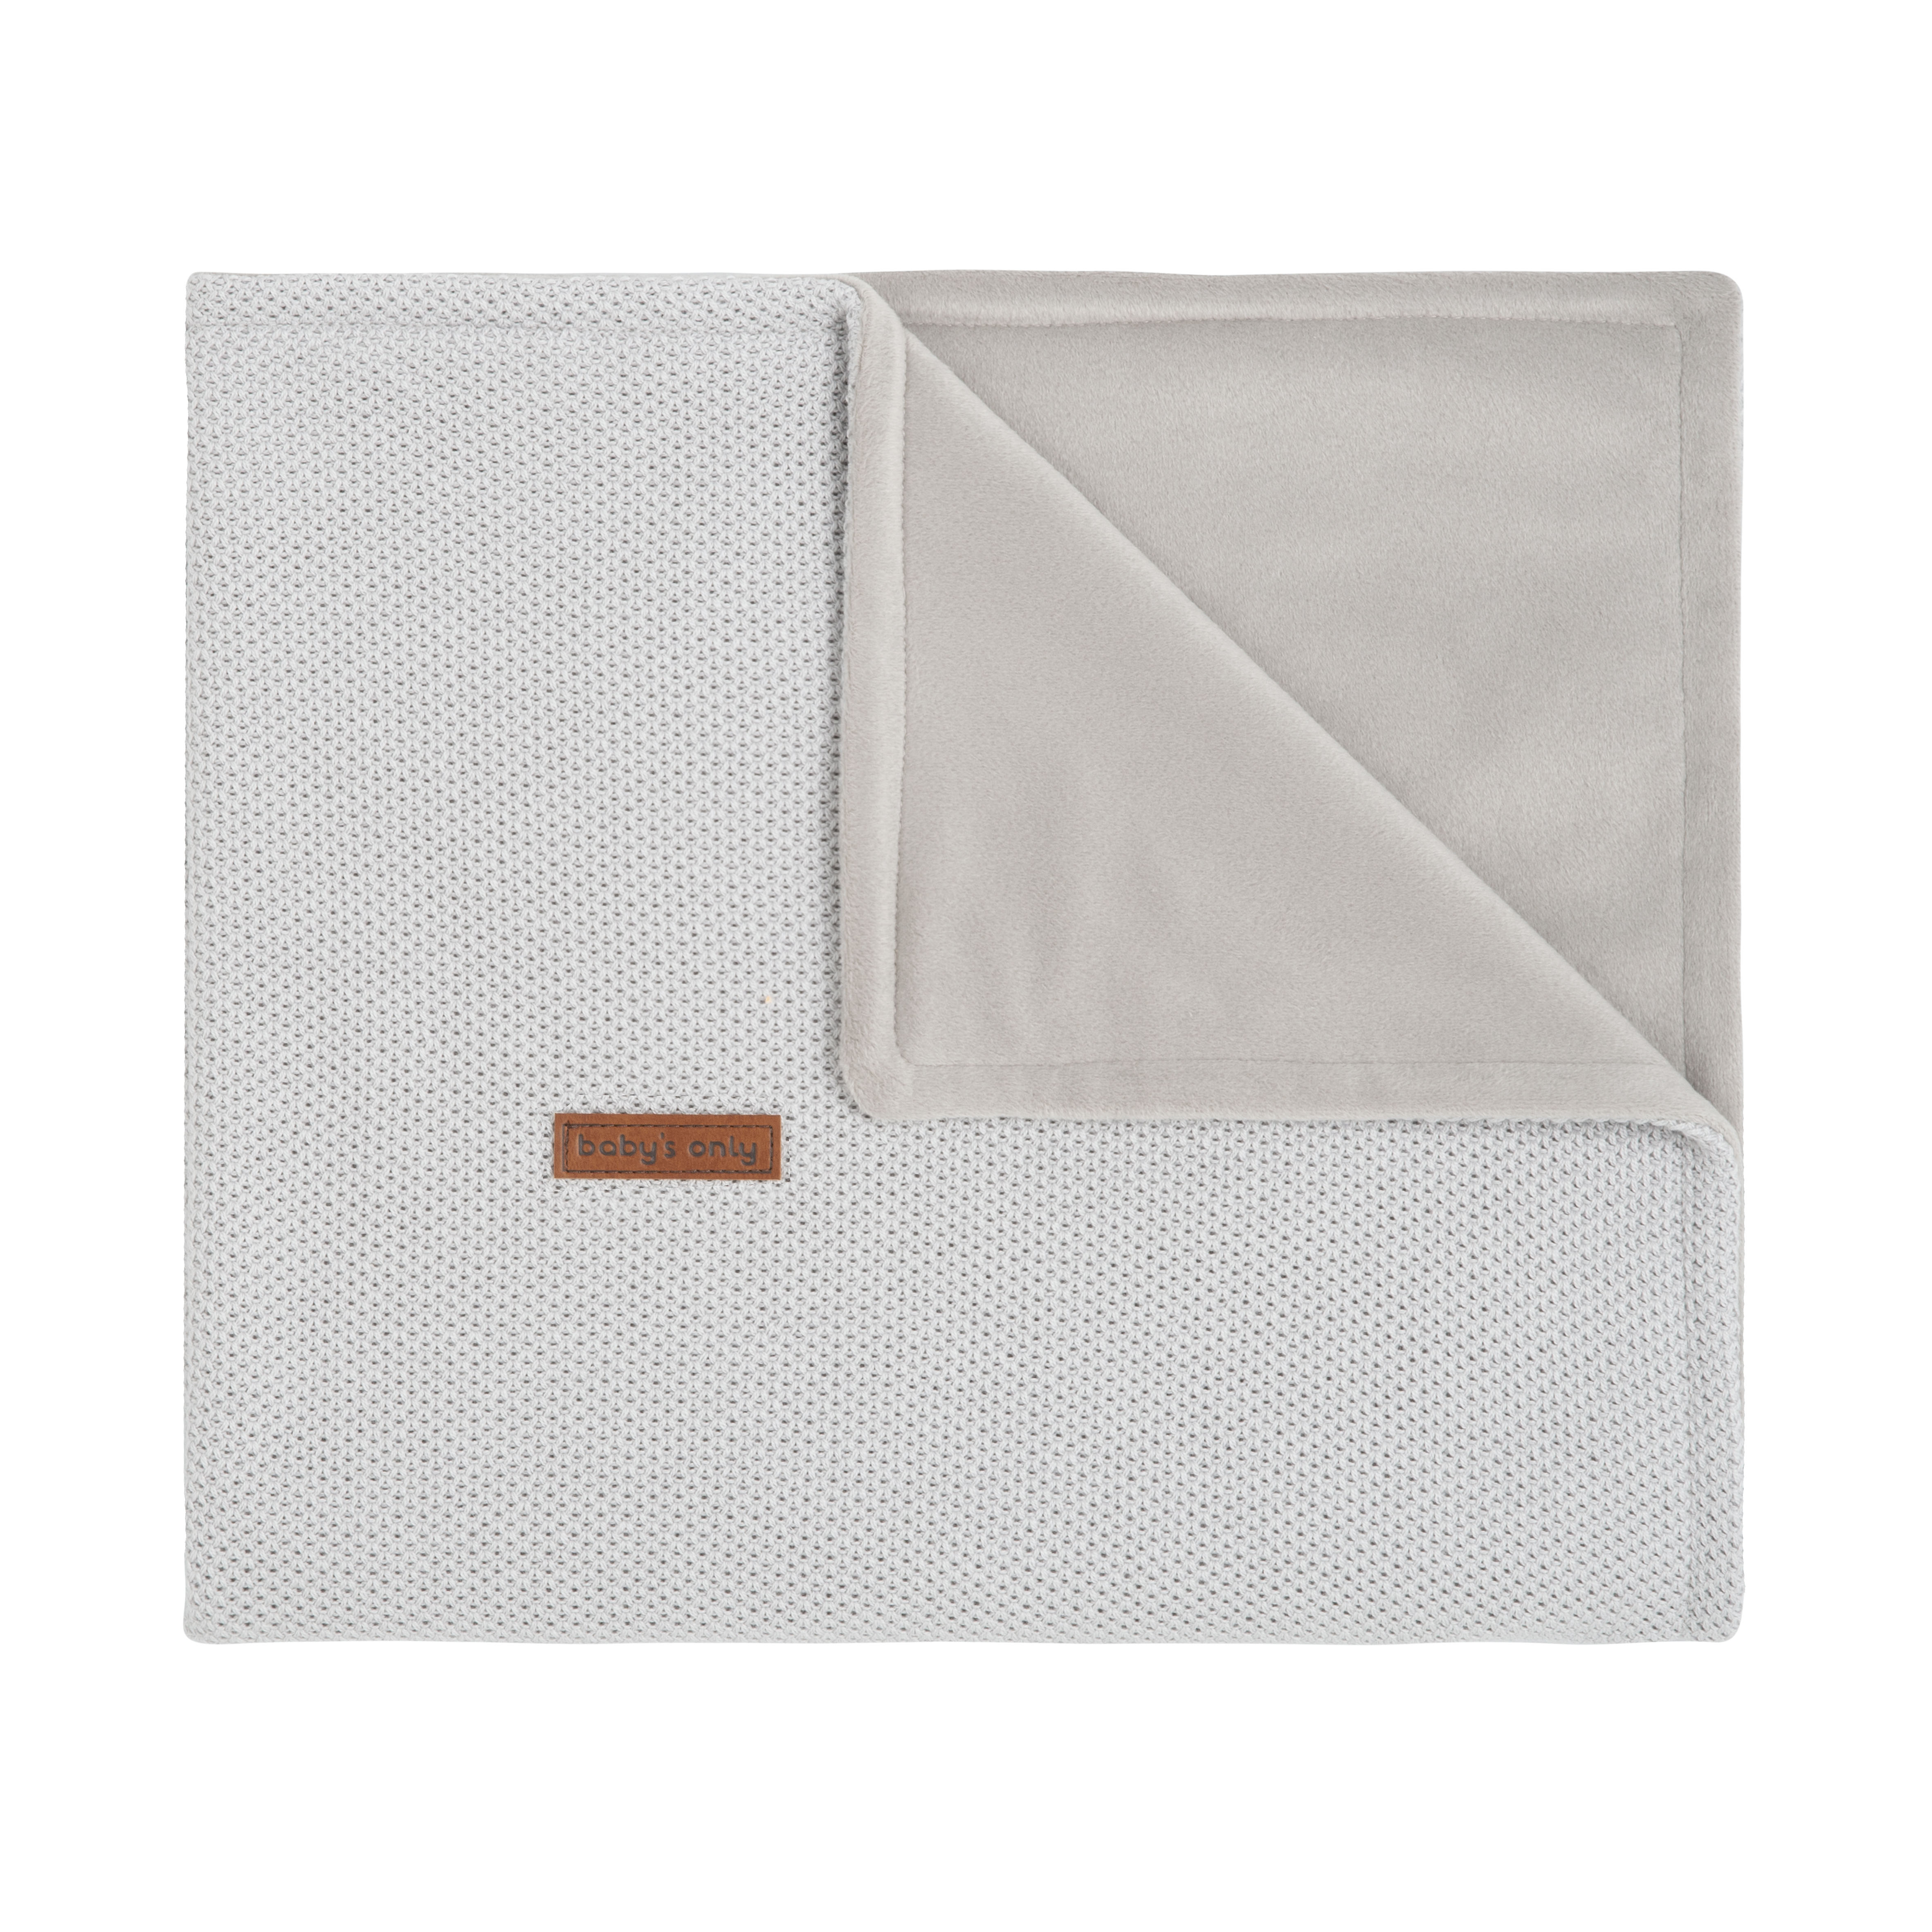 Cot blanket soft Classic silver-grey